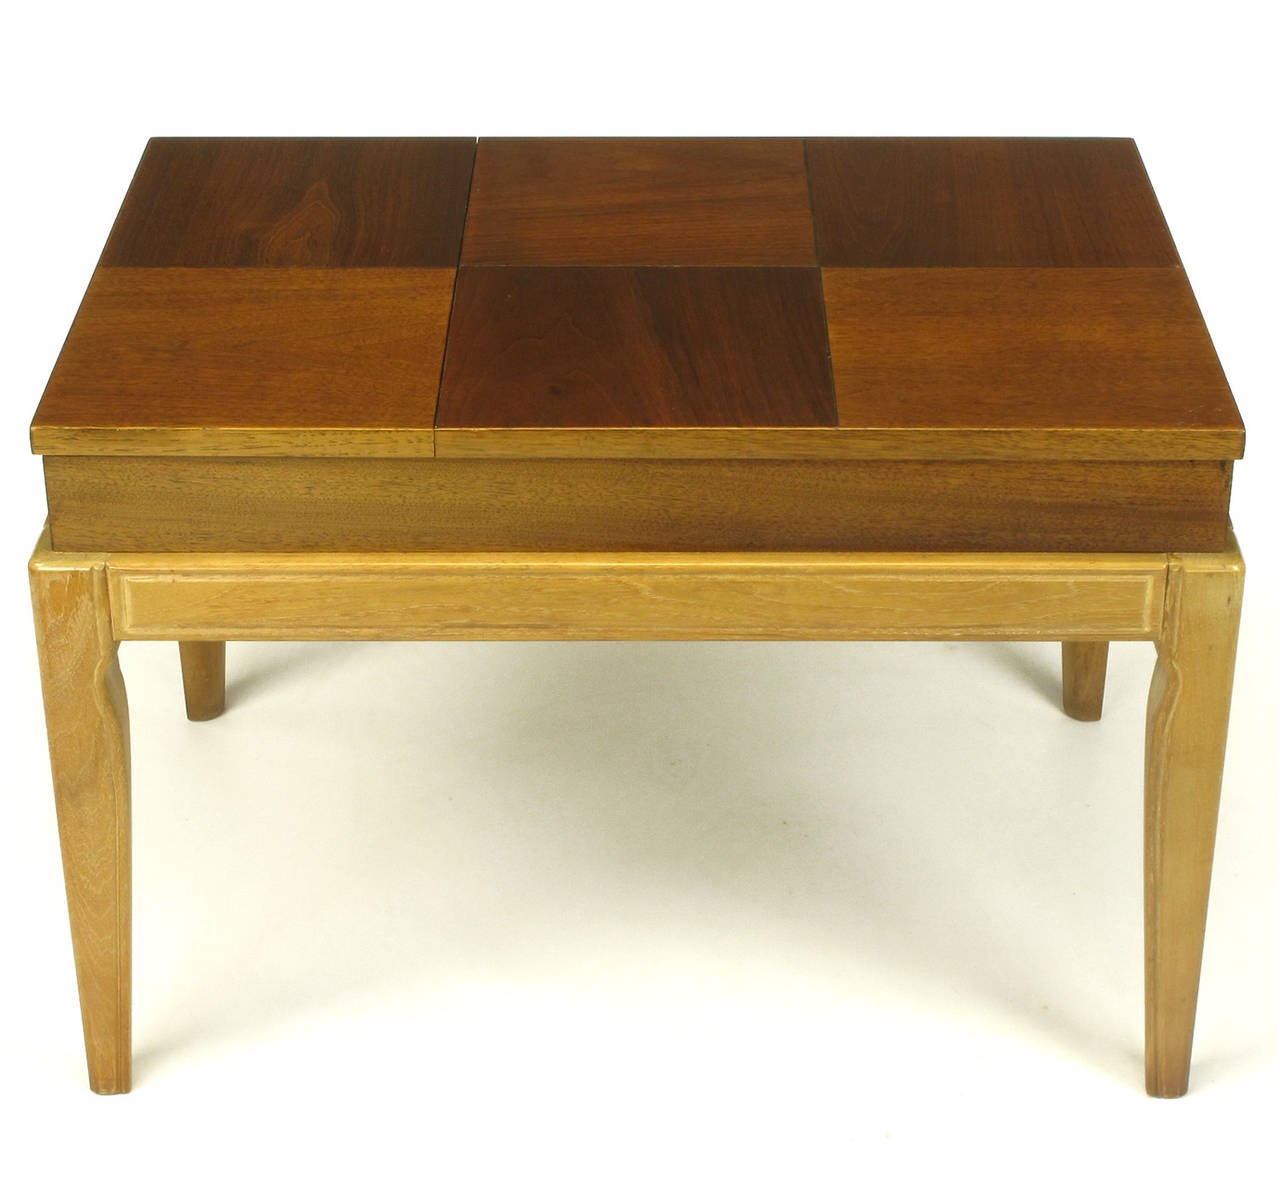 John Van Koert for Drexel side table or petite coffee table with walnut block parquetry top that flips up to reveal a storage area for remotes, magazines etc. Limed and bleached mahogany legs have incised detailing and crescent shaped curve at the